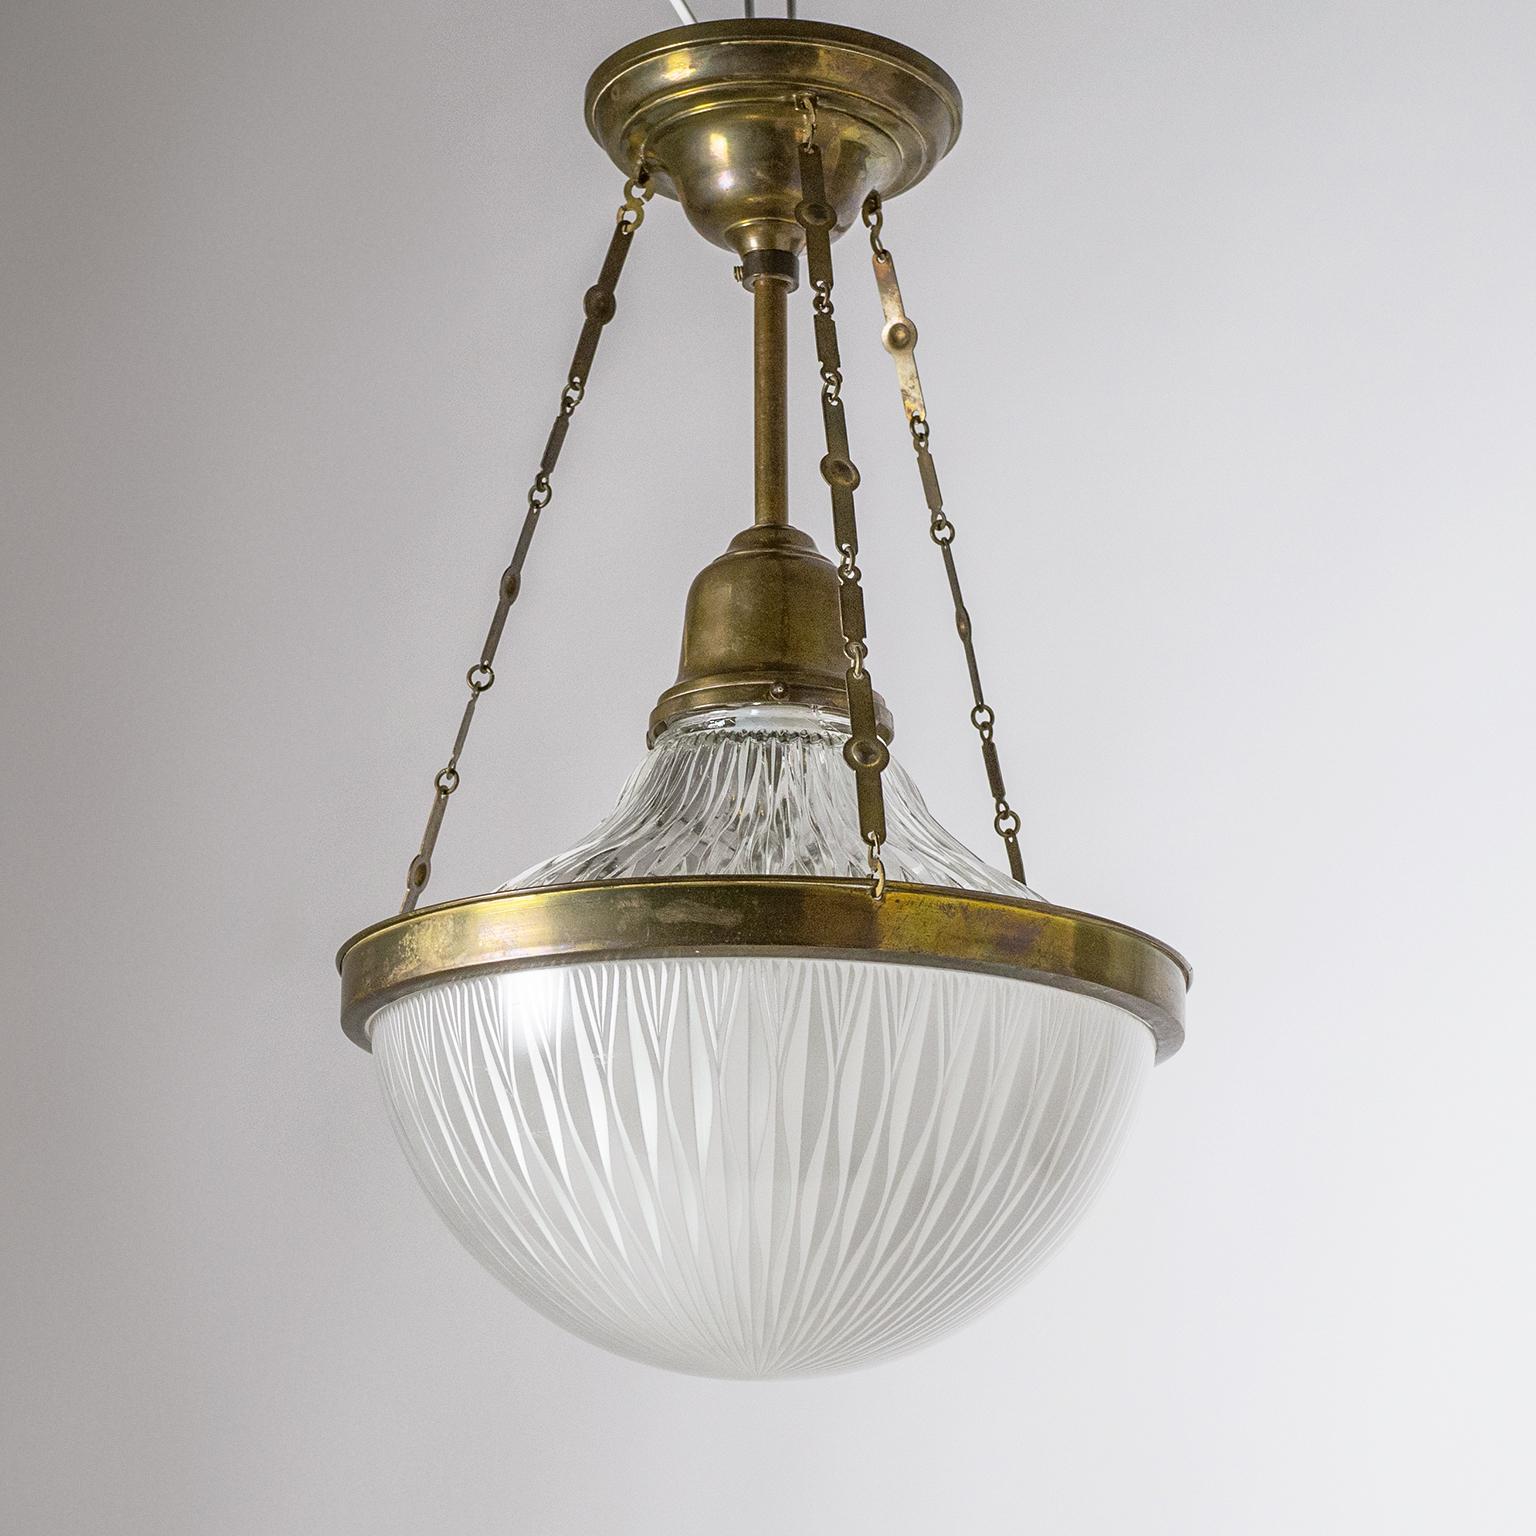 Elegant Art Deco ceiling light in brass and holophane glass, circa 1920. Two holophane glass diffusers are suspended by three sculpted brass chains, the bottom glass has a satin finish on the inside for a soft light dispersion. Good original